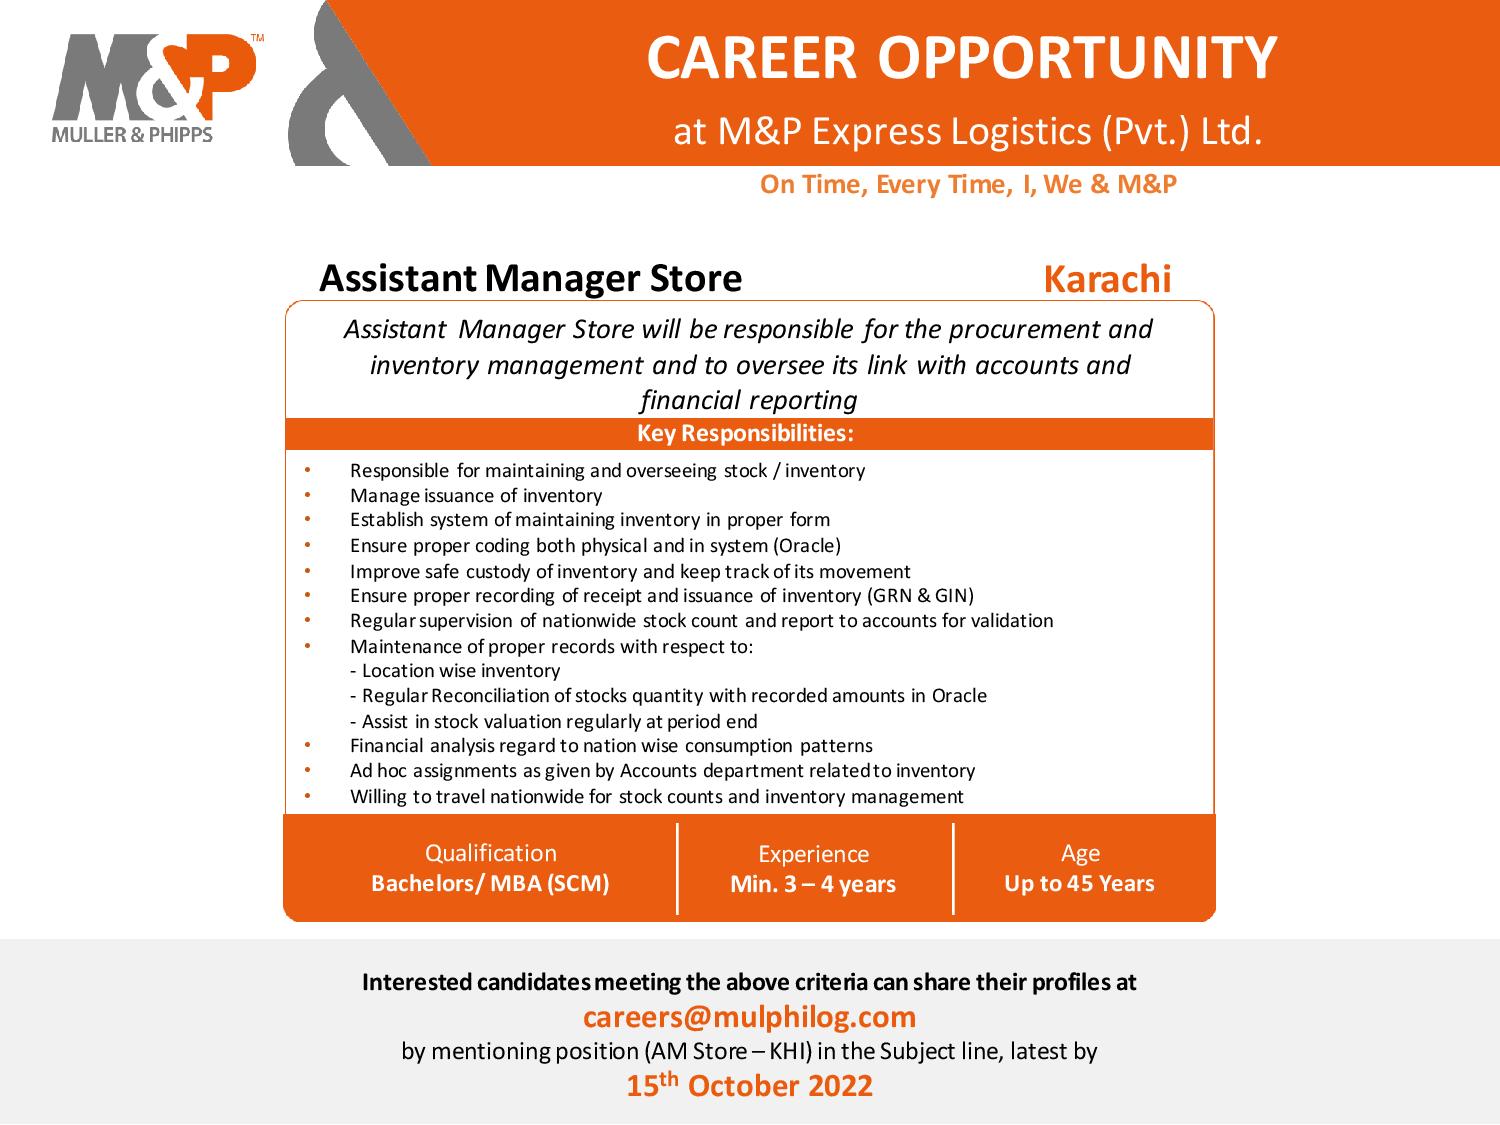 Assistant Manager Store opportunity at M&P Express Logistics